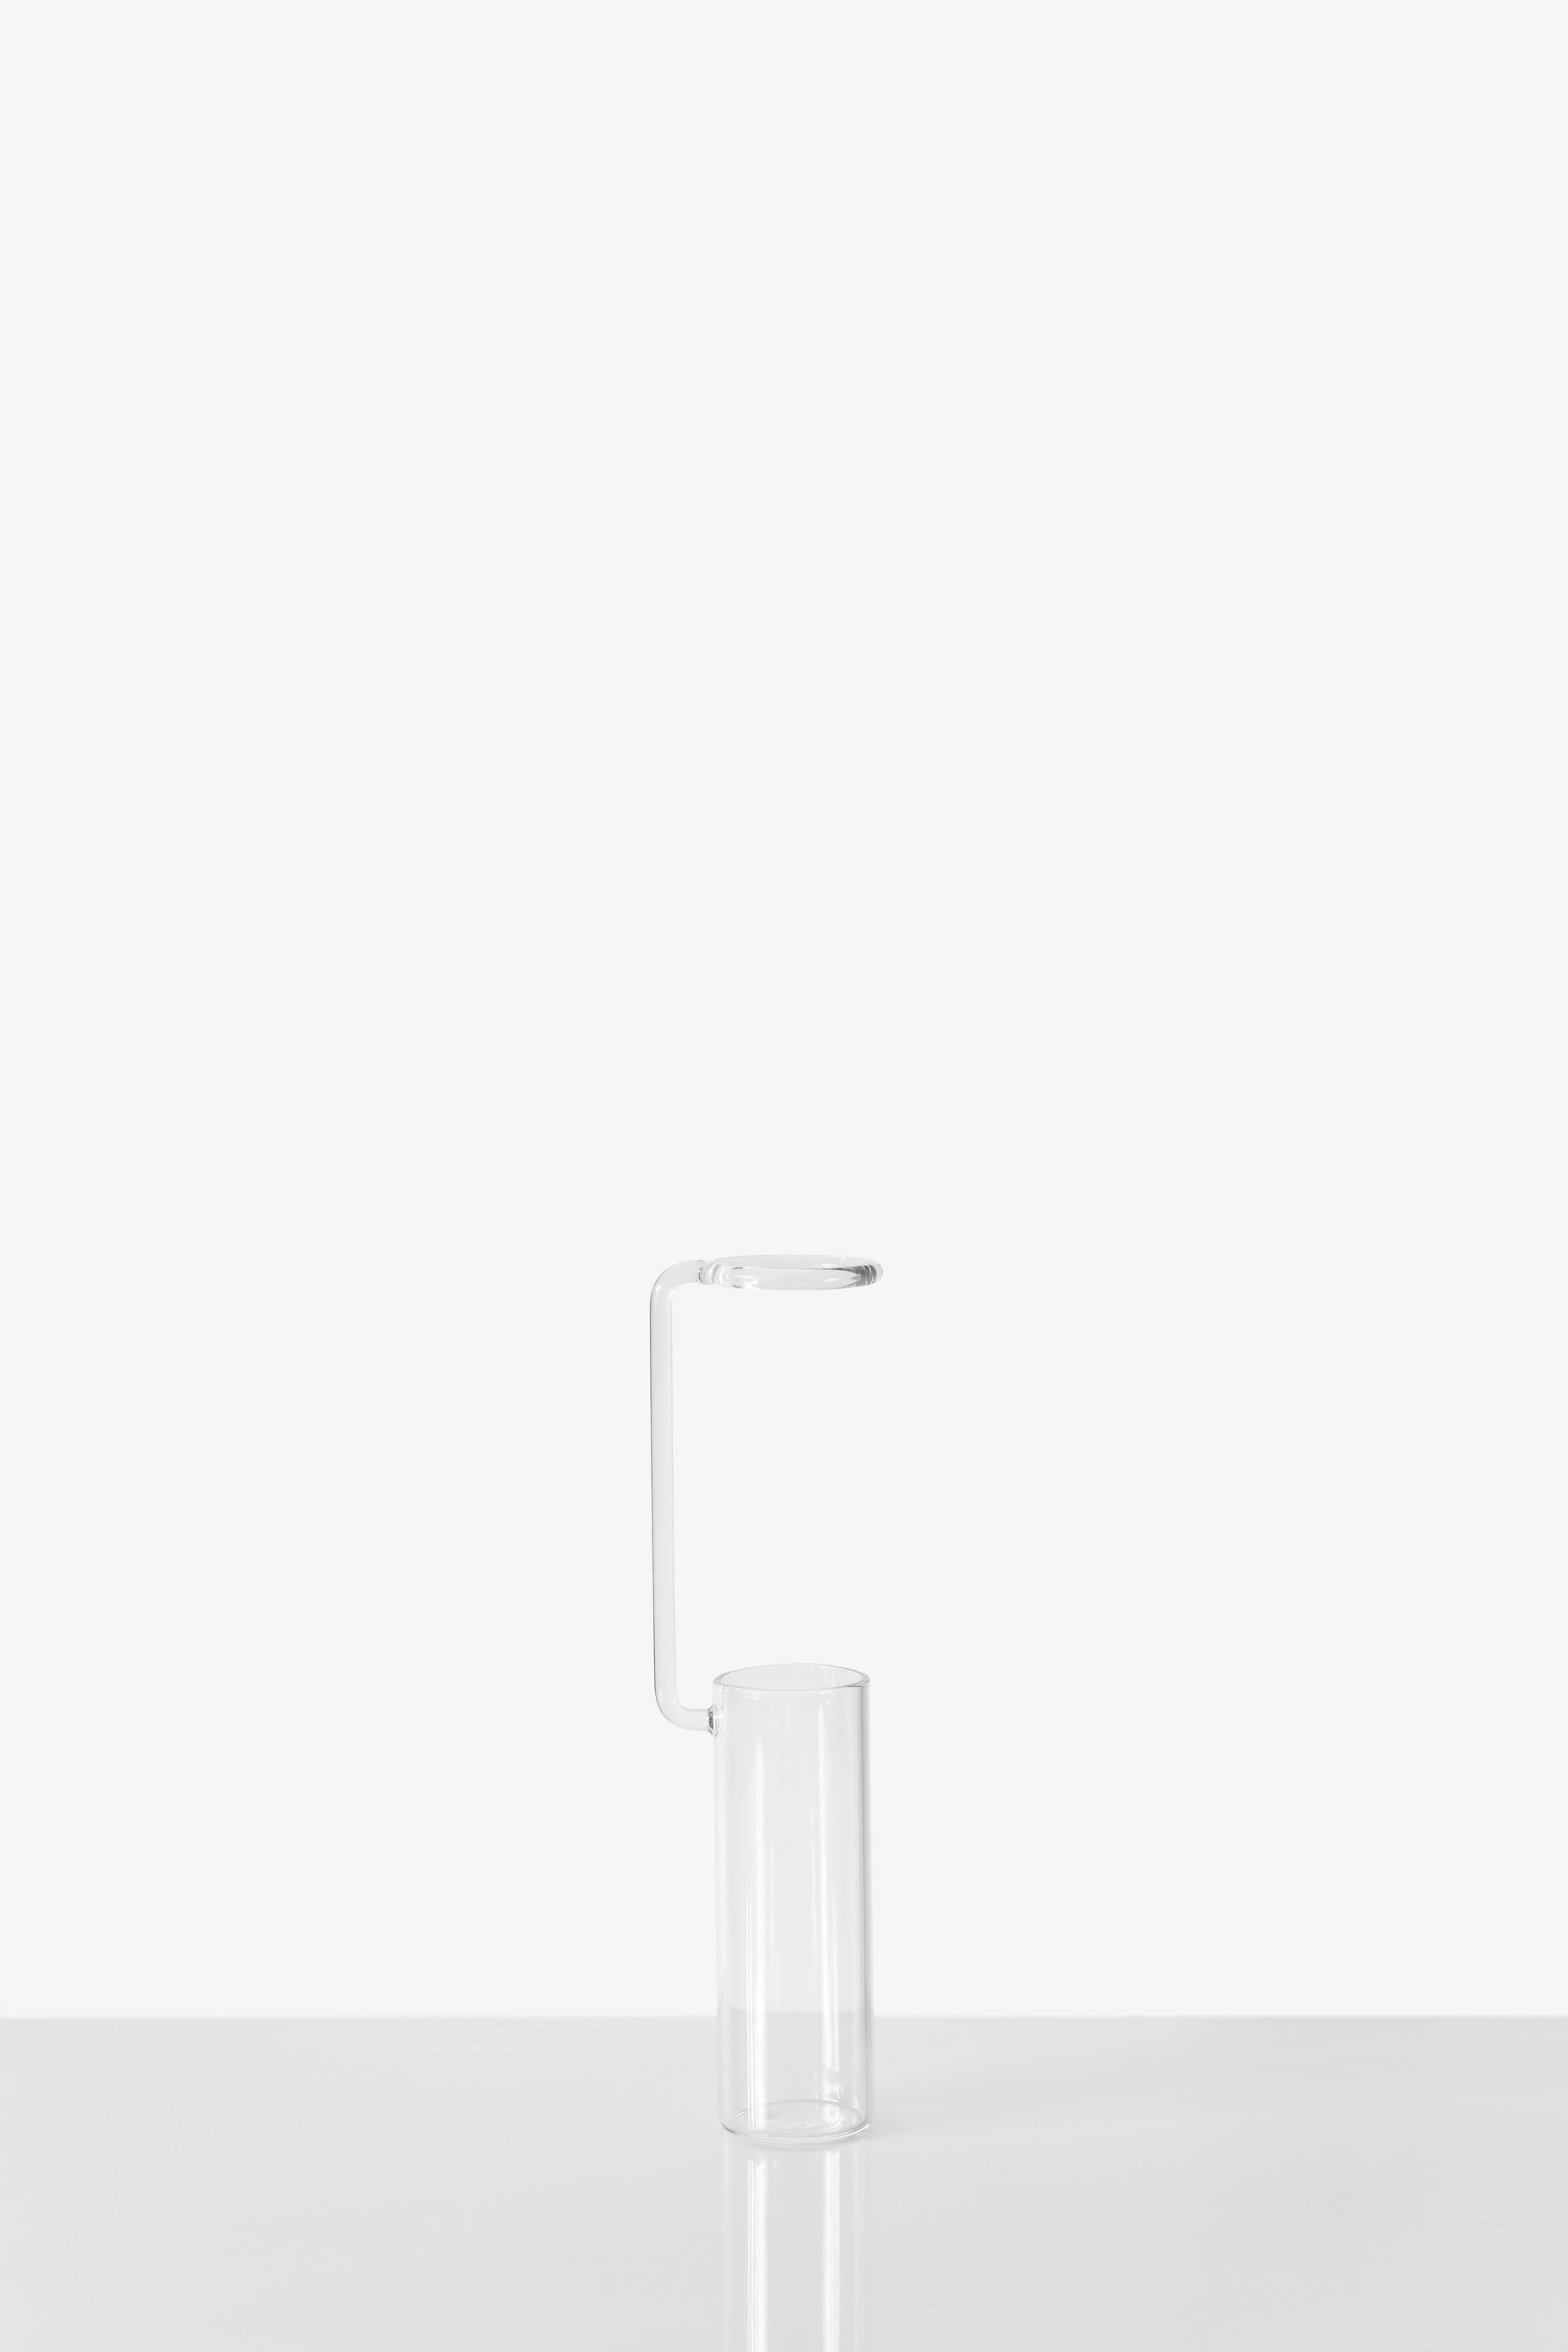 Vase designed by Adolfo Abejon

Measures: 63 × 42 × 232 mm (L × W × H). Glass.

We offer free worldwide shipping for this piece.

Melancholia is a series of handmade glass vases. Inspired by laboratory test tubes, they turn flowers into study